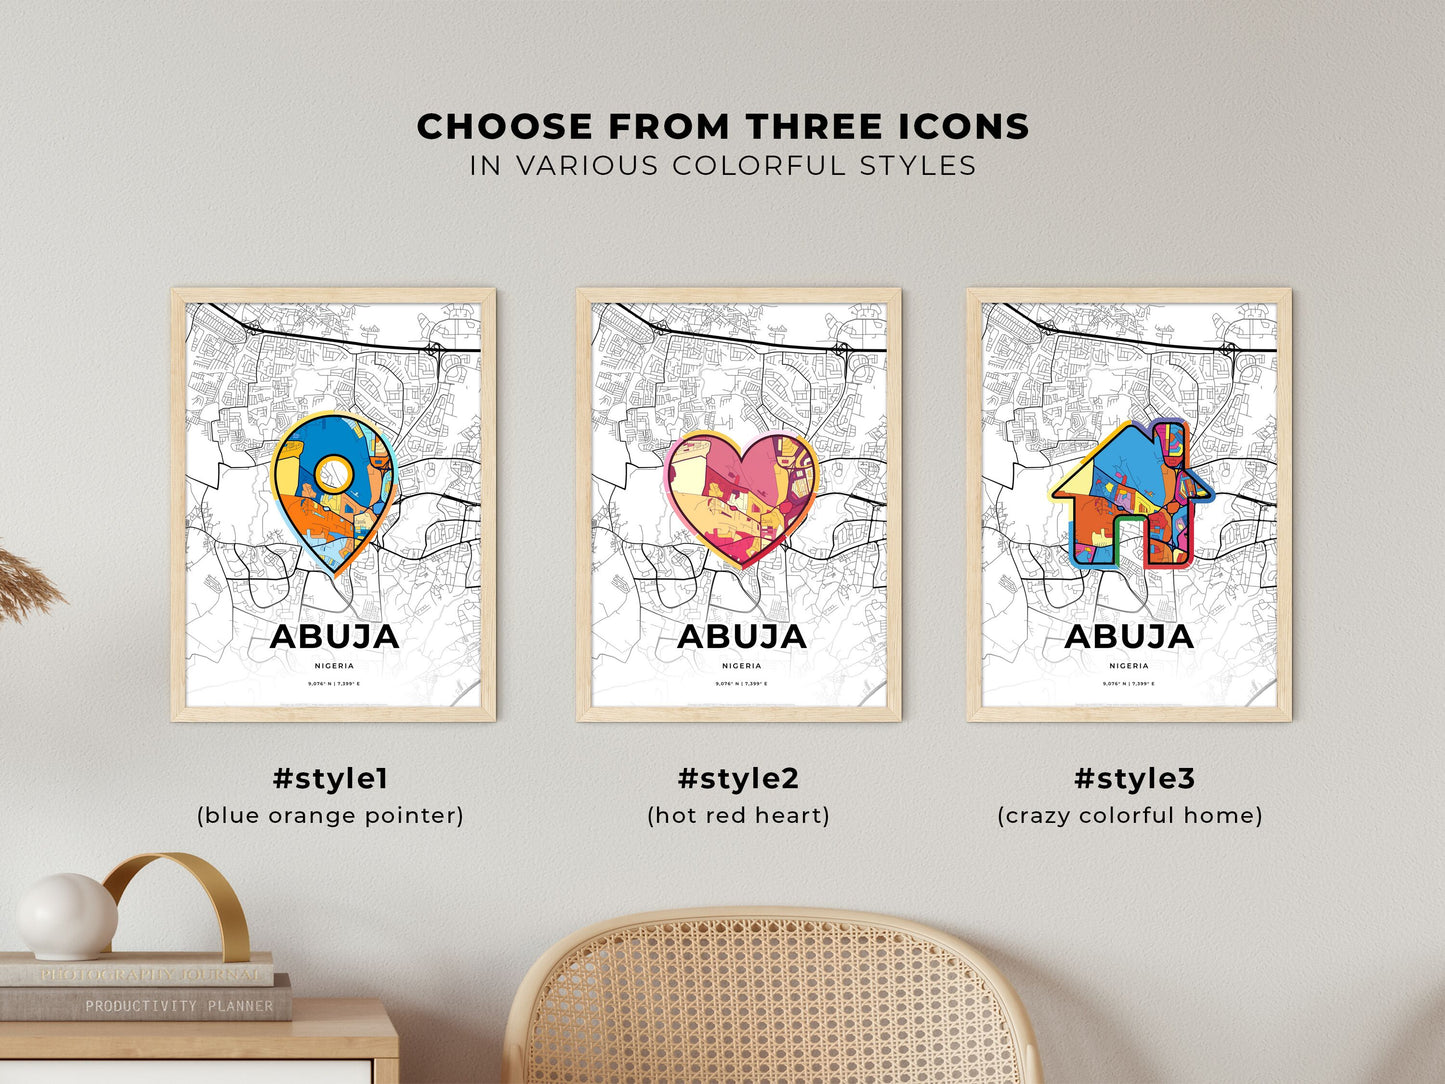 ABUJA NIGERIA minimal art map with a colorful icon. Where it all began, Couple map gift.